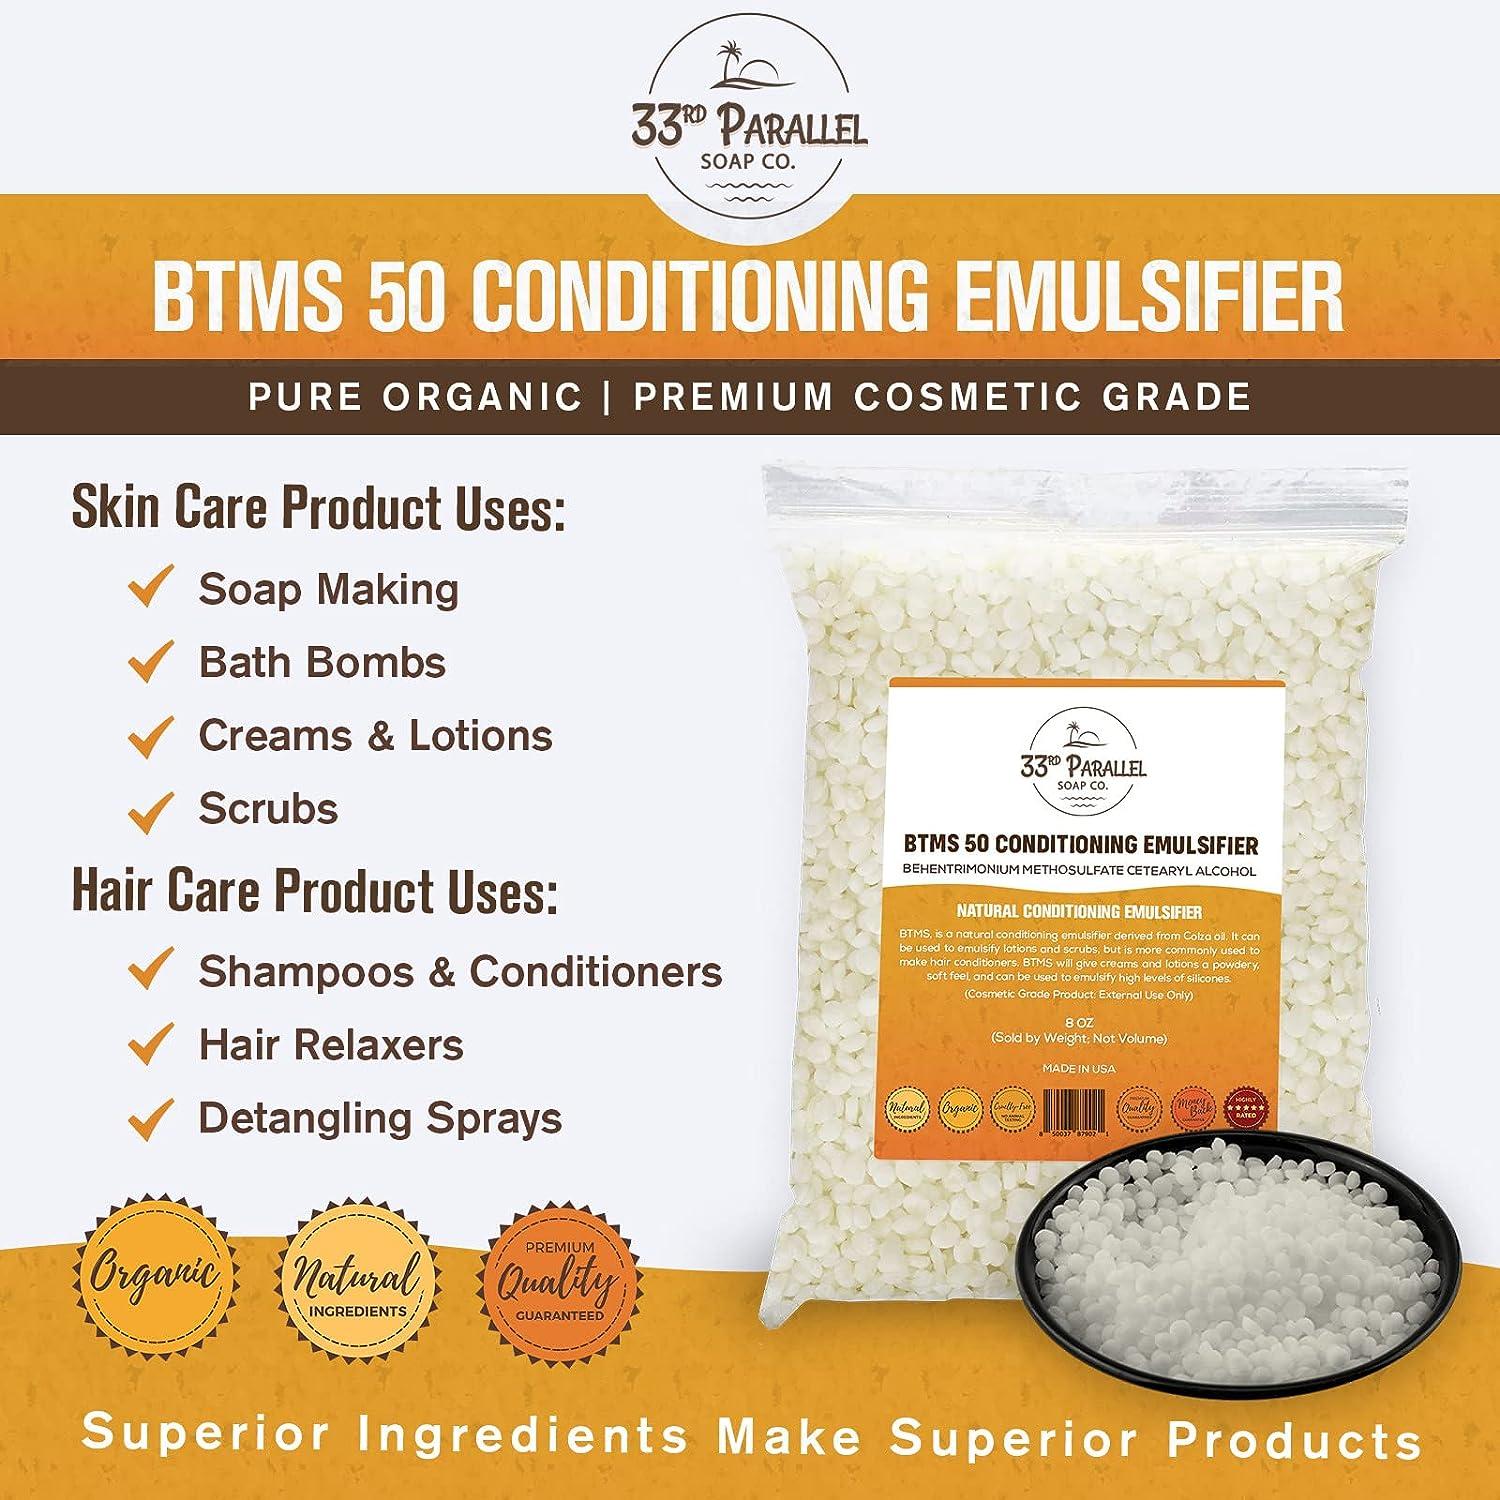 BTMS-50, Conditioning Emulsifying Wax, Vegetable Based Emulsifier for Hair  Care, Creams, Lotions, DIY Skin & Hair Care Product,natural, 1 Kg -   Israel